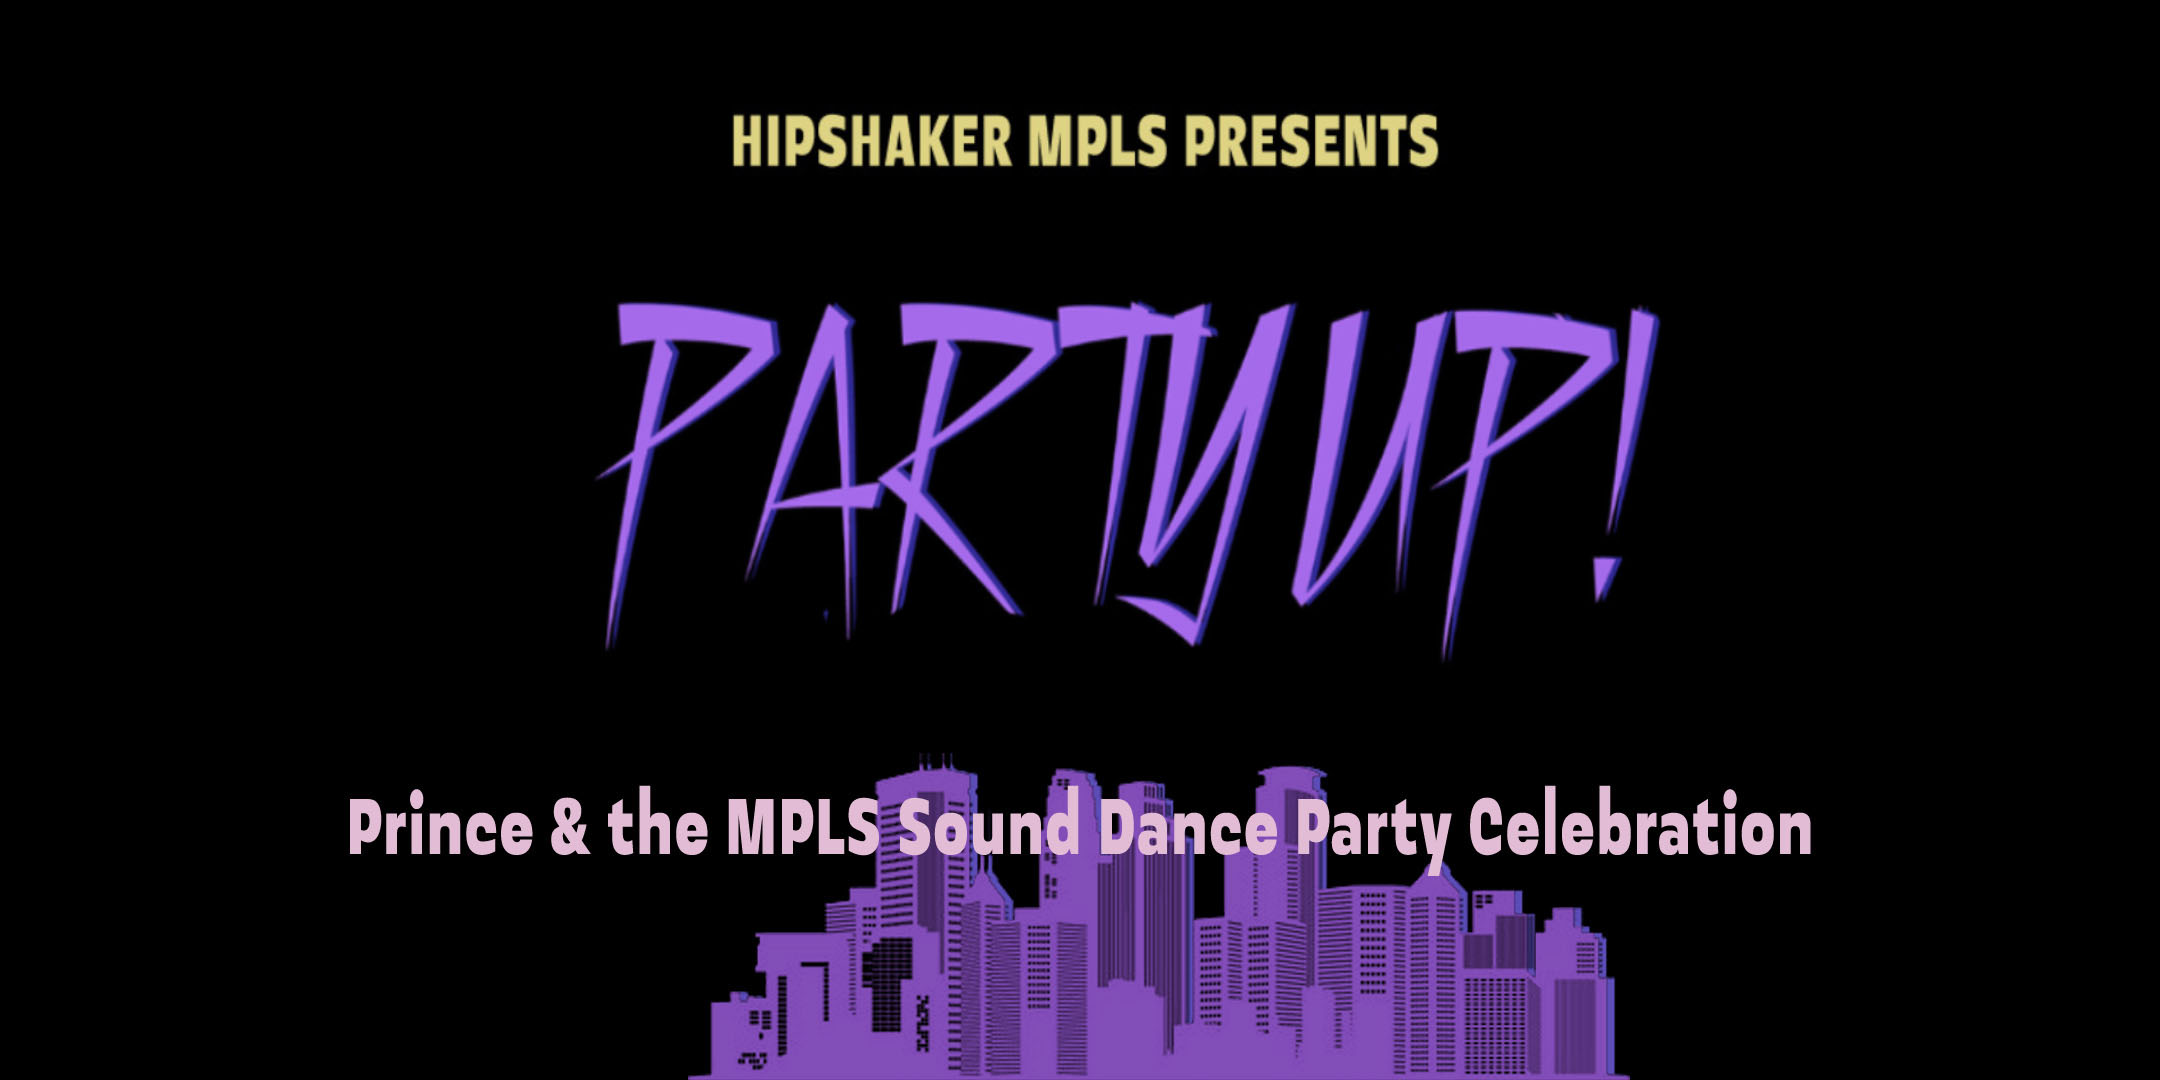 Hipshaker MPLS Presents: Partyup! Prince and the MPLS Sound Dance Party DJs Brian Engel, Noah Kurth Saturday, June 3 James Ballentine "Uptown" VFW Post 246 Doors 10:00pm :: Music 10:00pm :: 21+ GA $10 ADV / $15 DOS NO REFUNDS